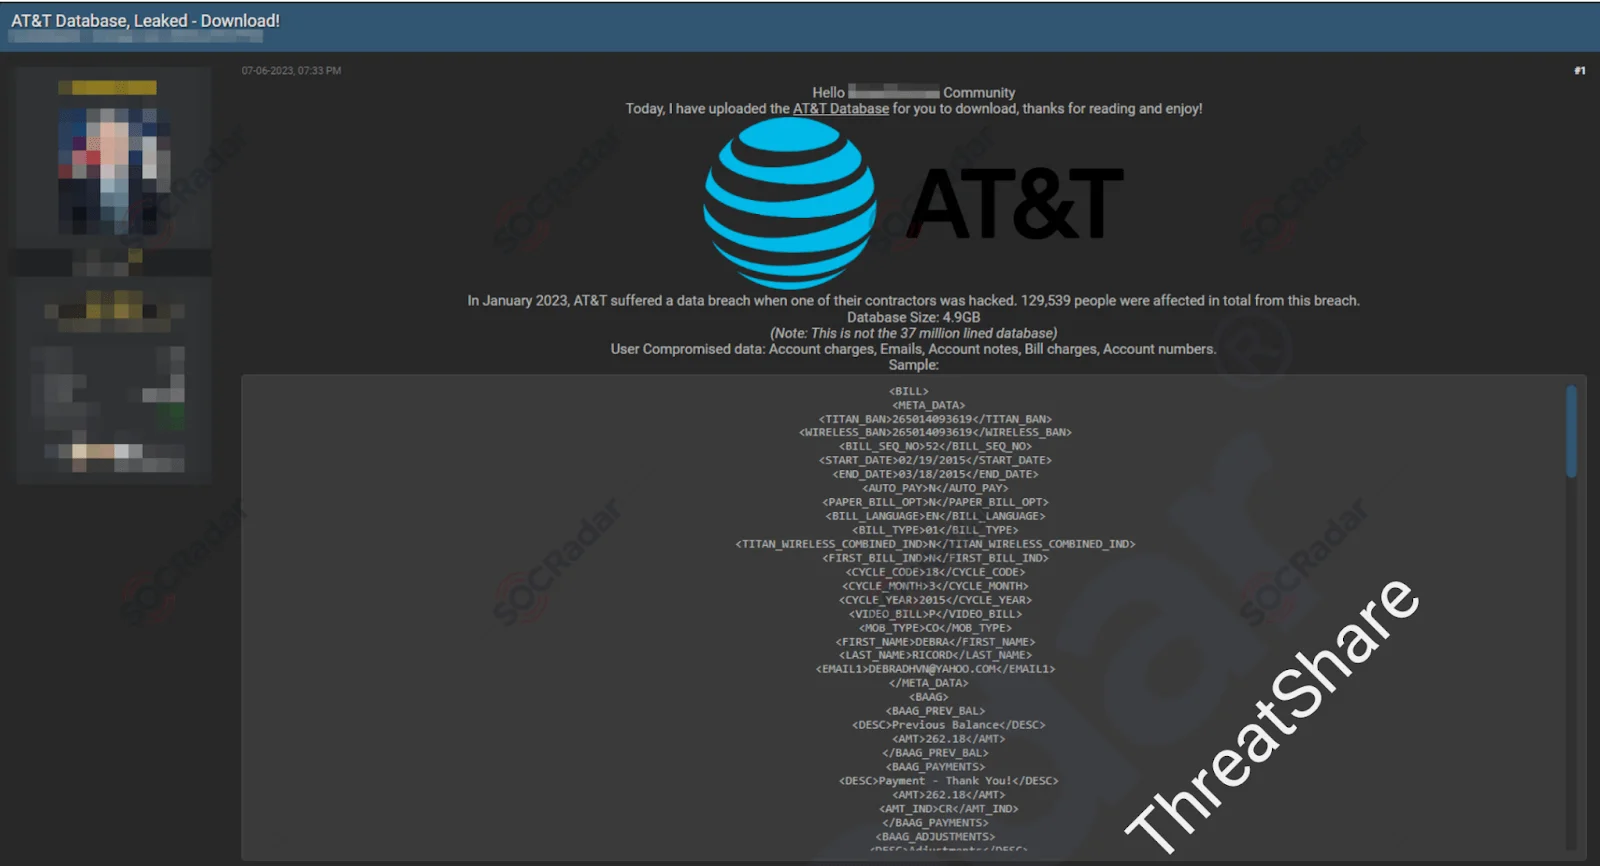 AT&T (The American Telephone and Telegraph Company) Database Leak